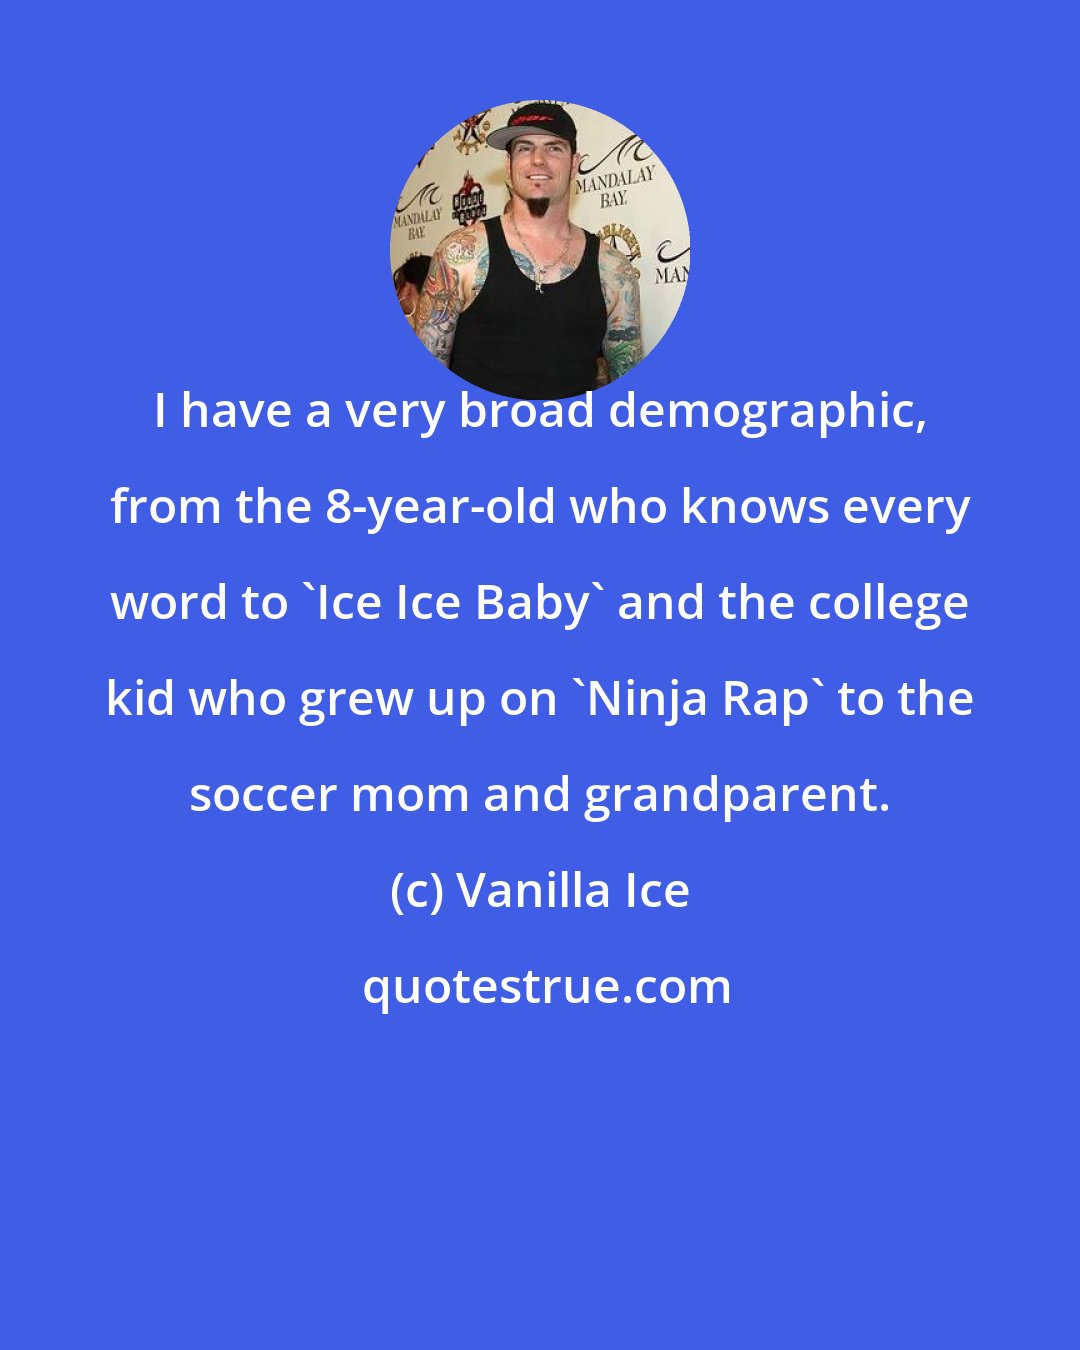 Vanilla Ice: I have a very broad demographic, from the 8-year-old who knows every word to 'Ice Ice Baby' and the college kid who grew up on 'Ninja Rap' to the soccer mom and grandparent.